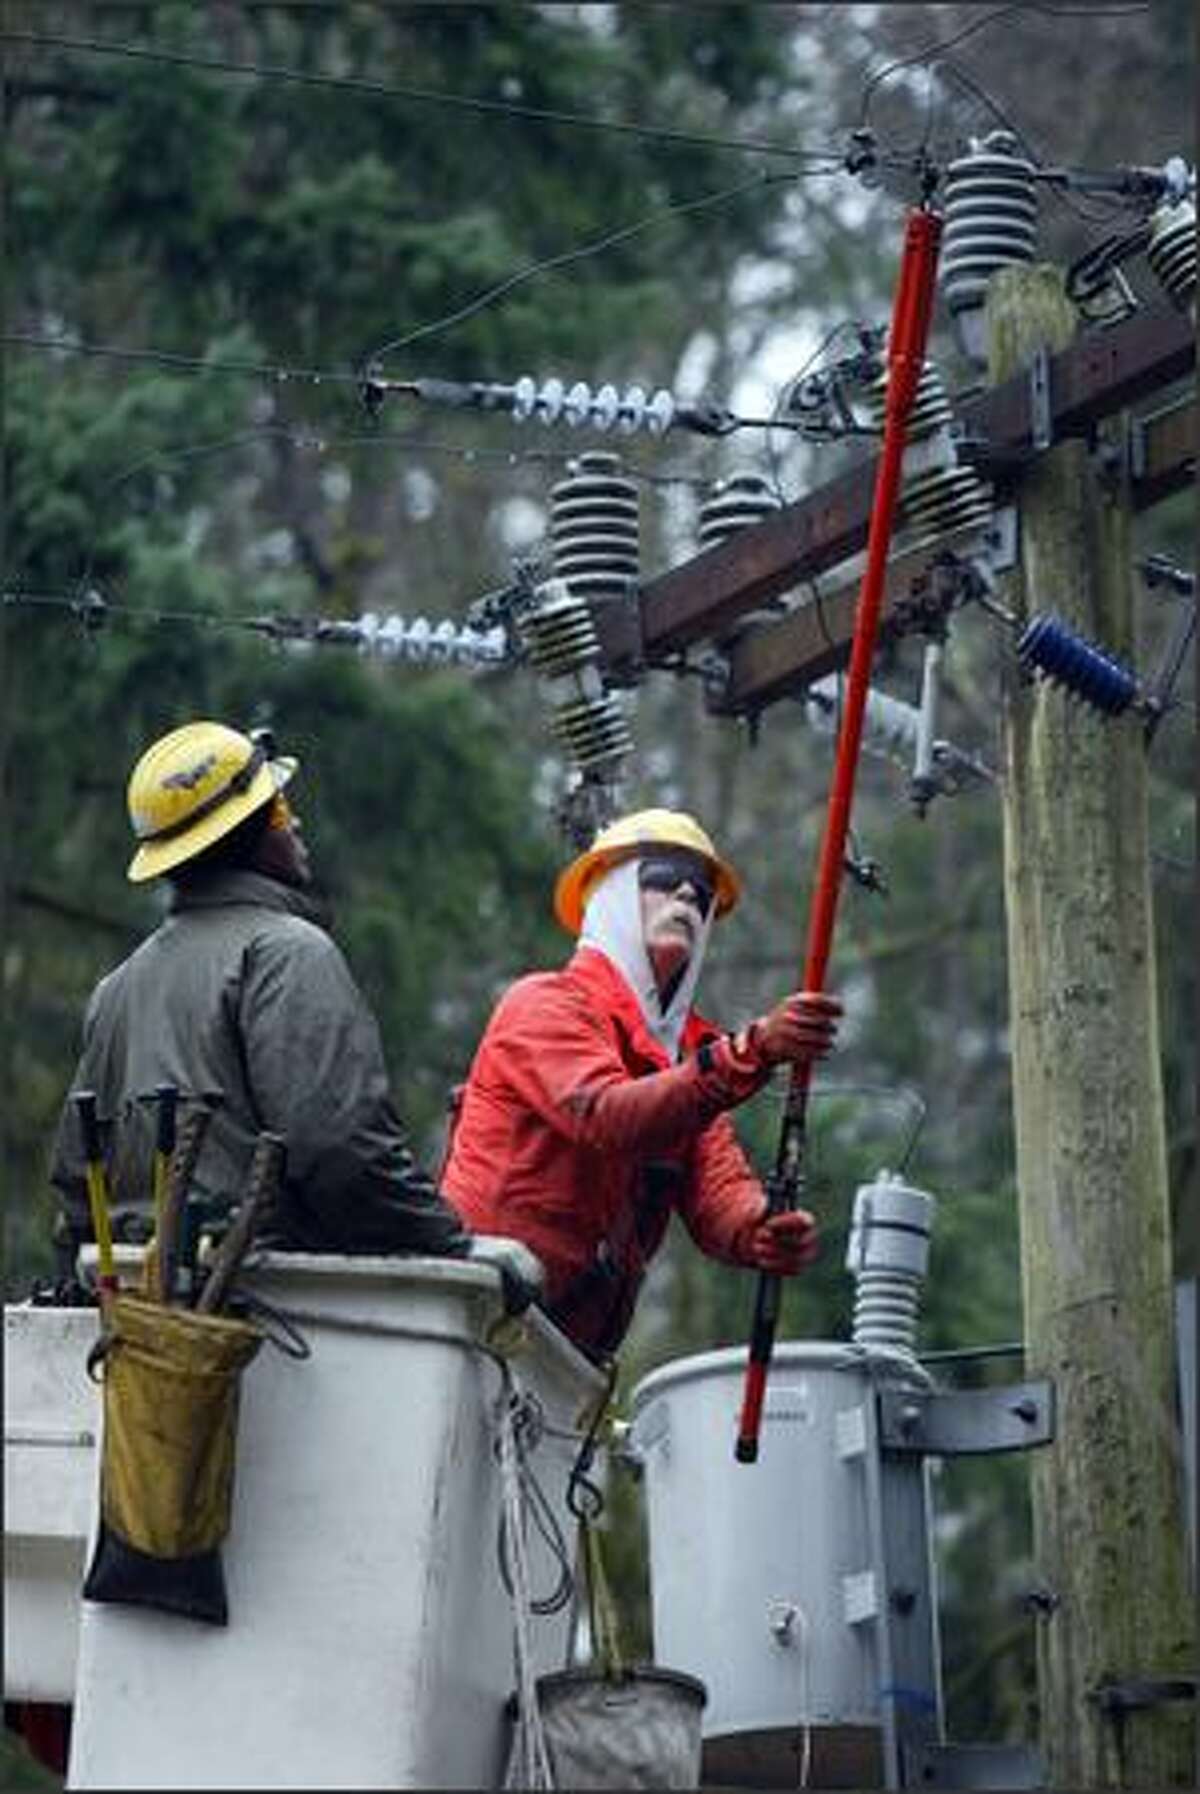 Seattle City Light workers work to replace a transformer bank in Lake Forest Park last week. During the storm response, City Light instituted a rule that limited crews to a 17-hour shift.